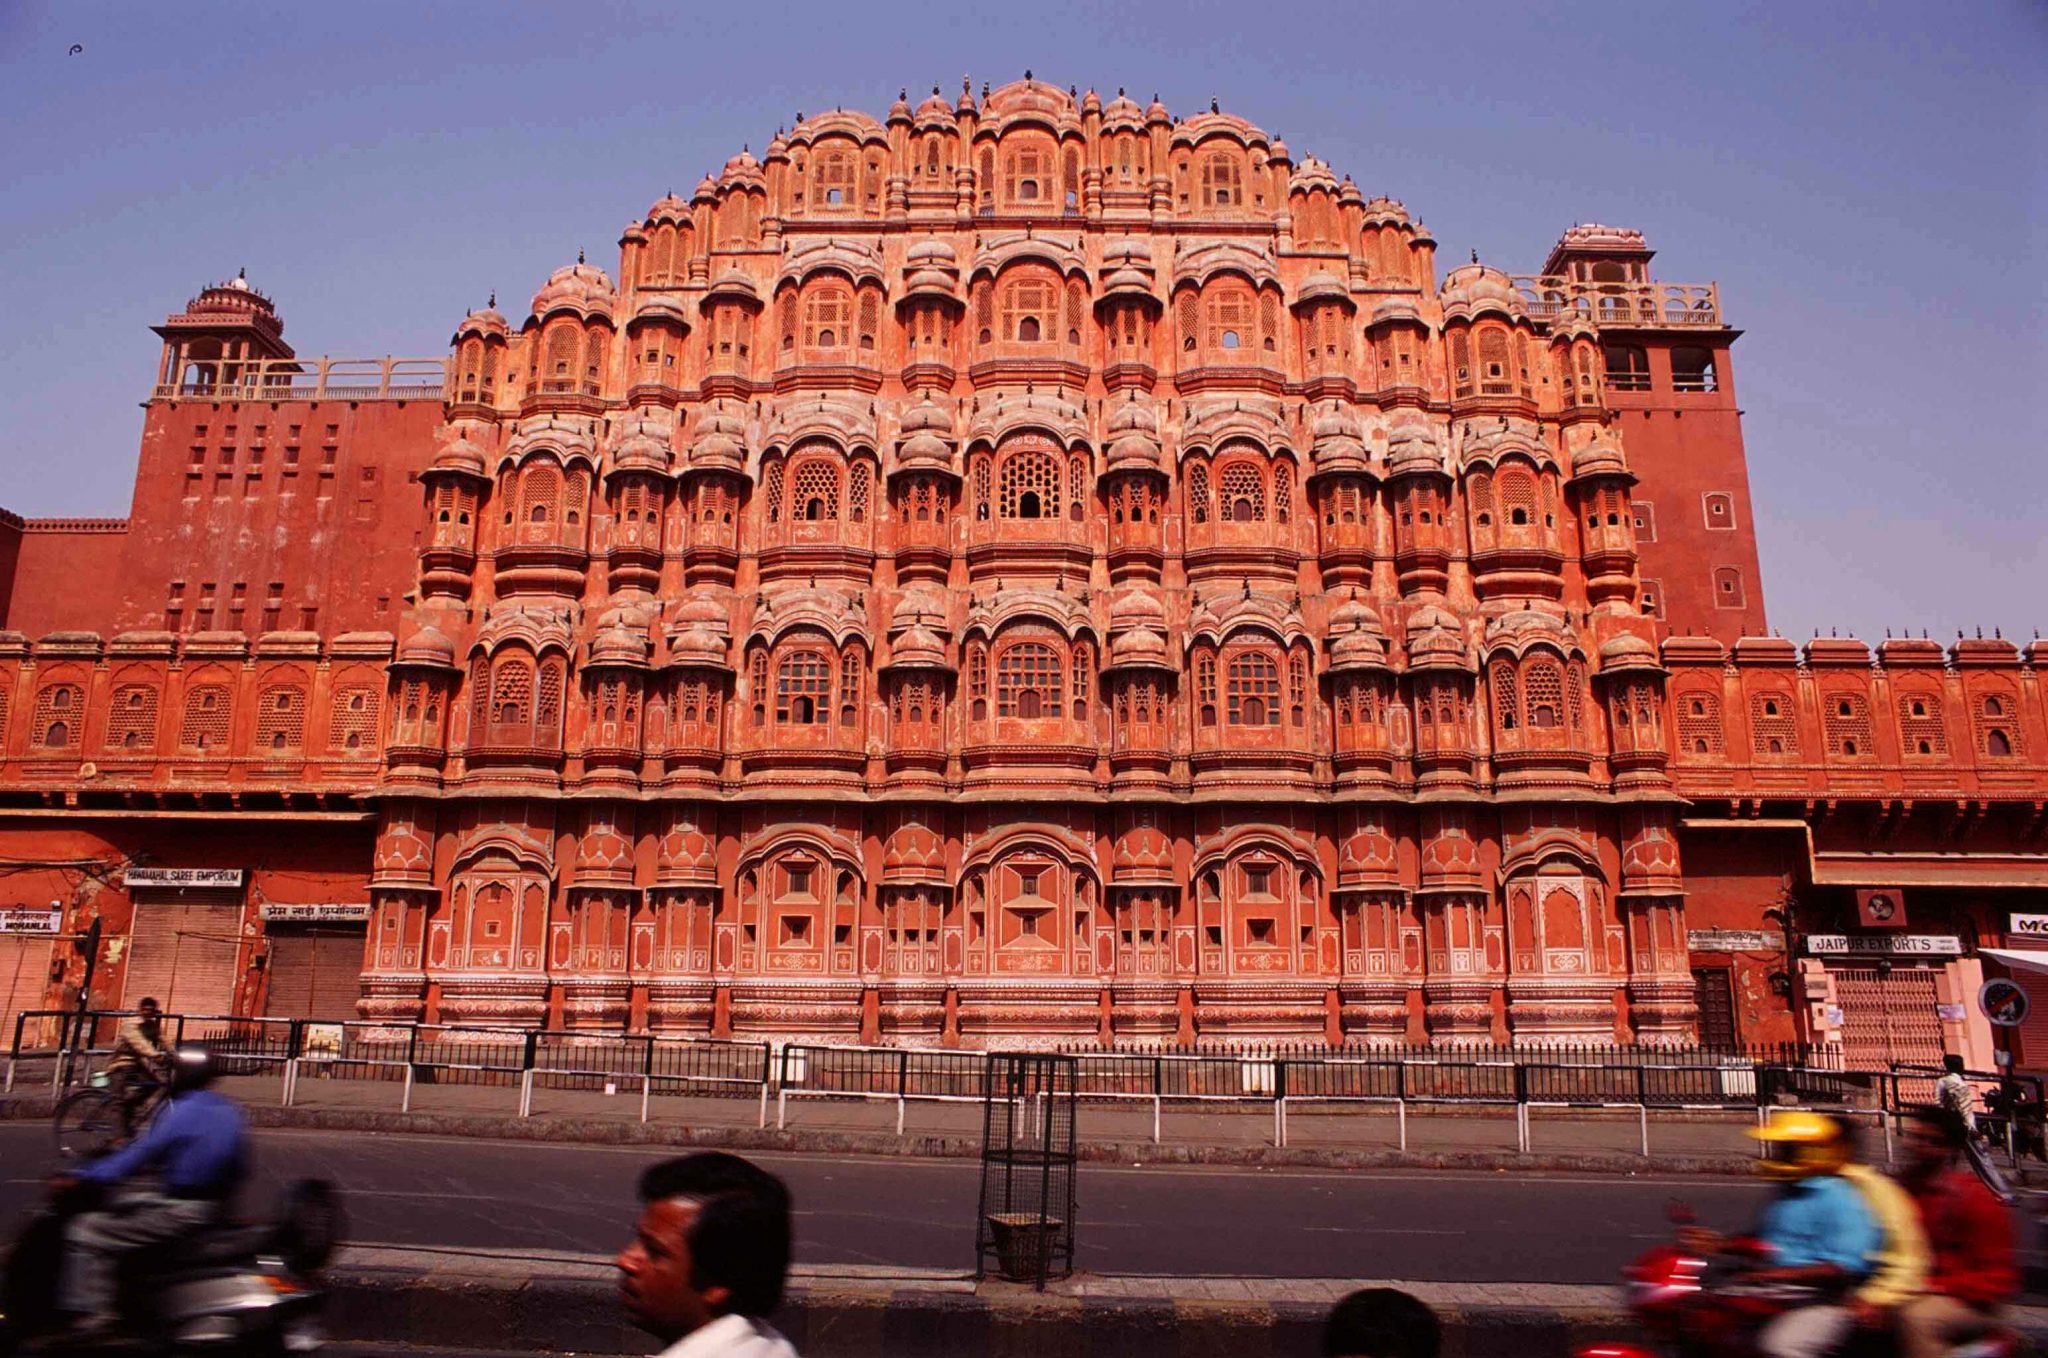 Some Attractions To Explore In The City Of Jaipur